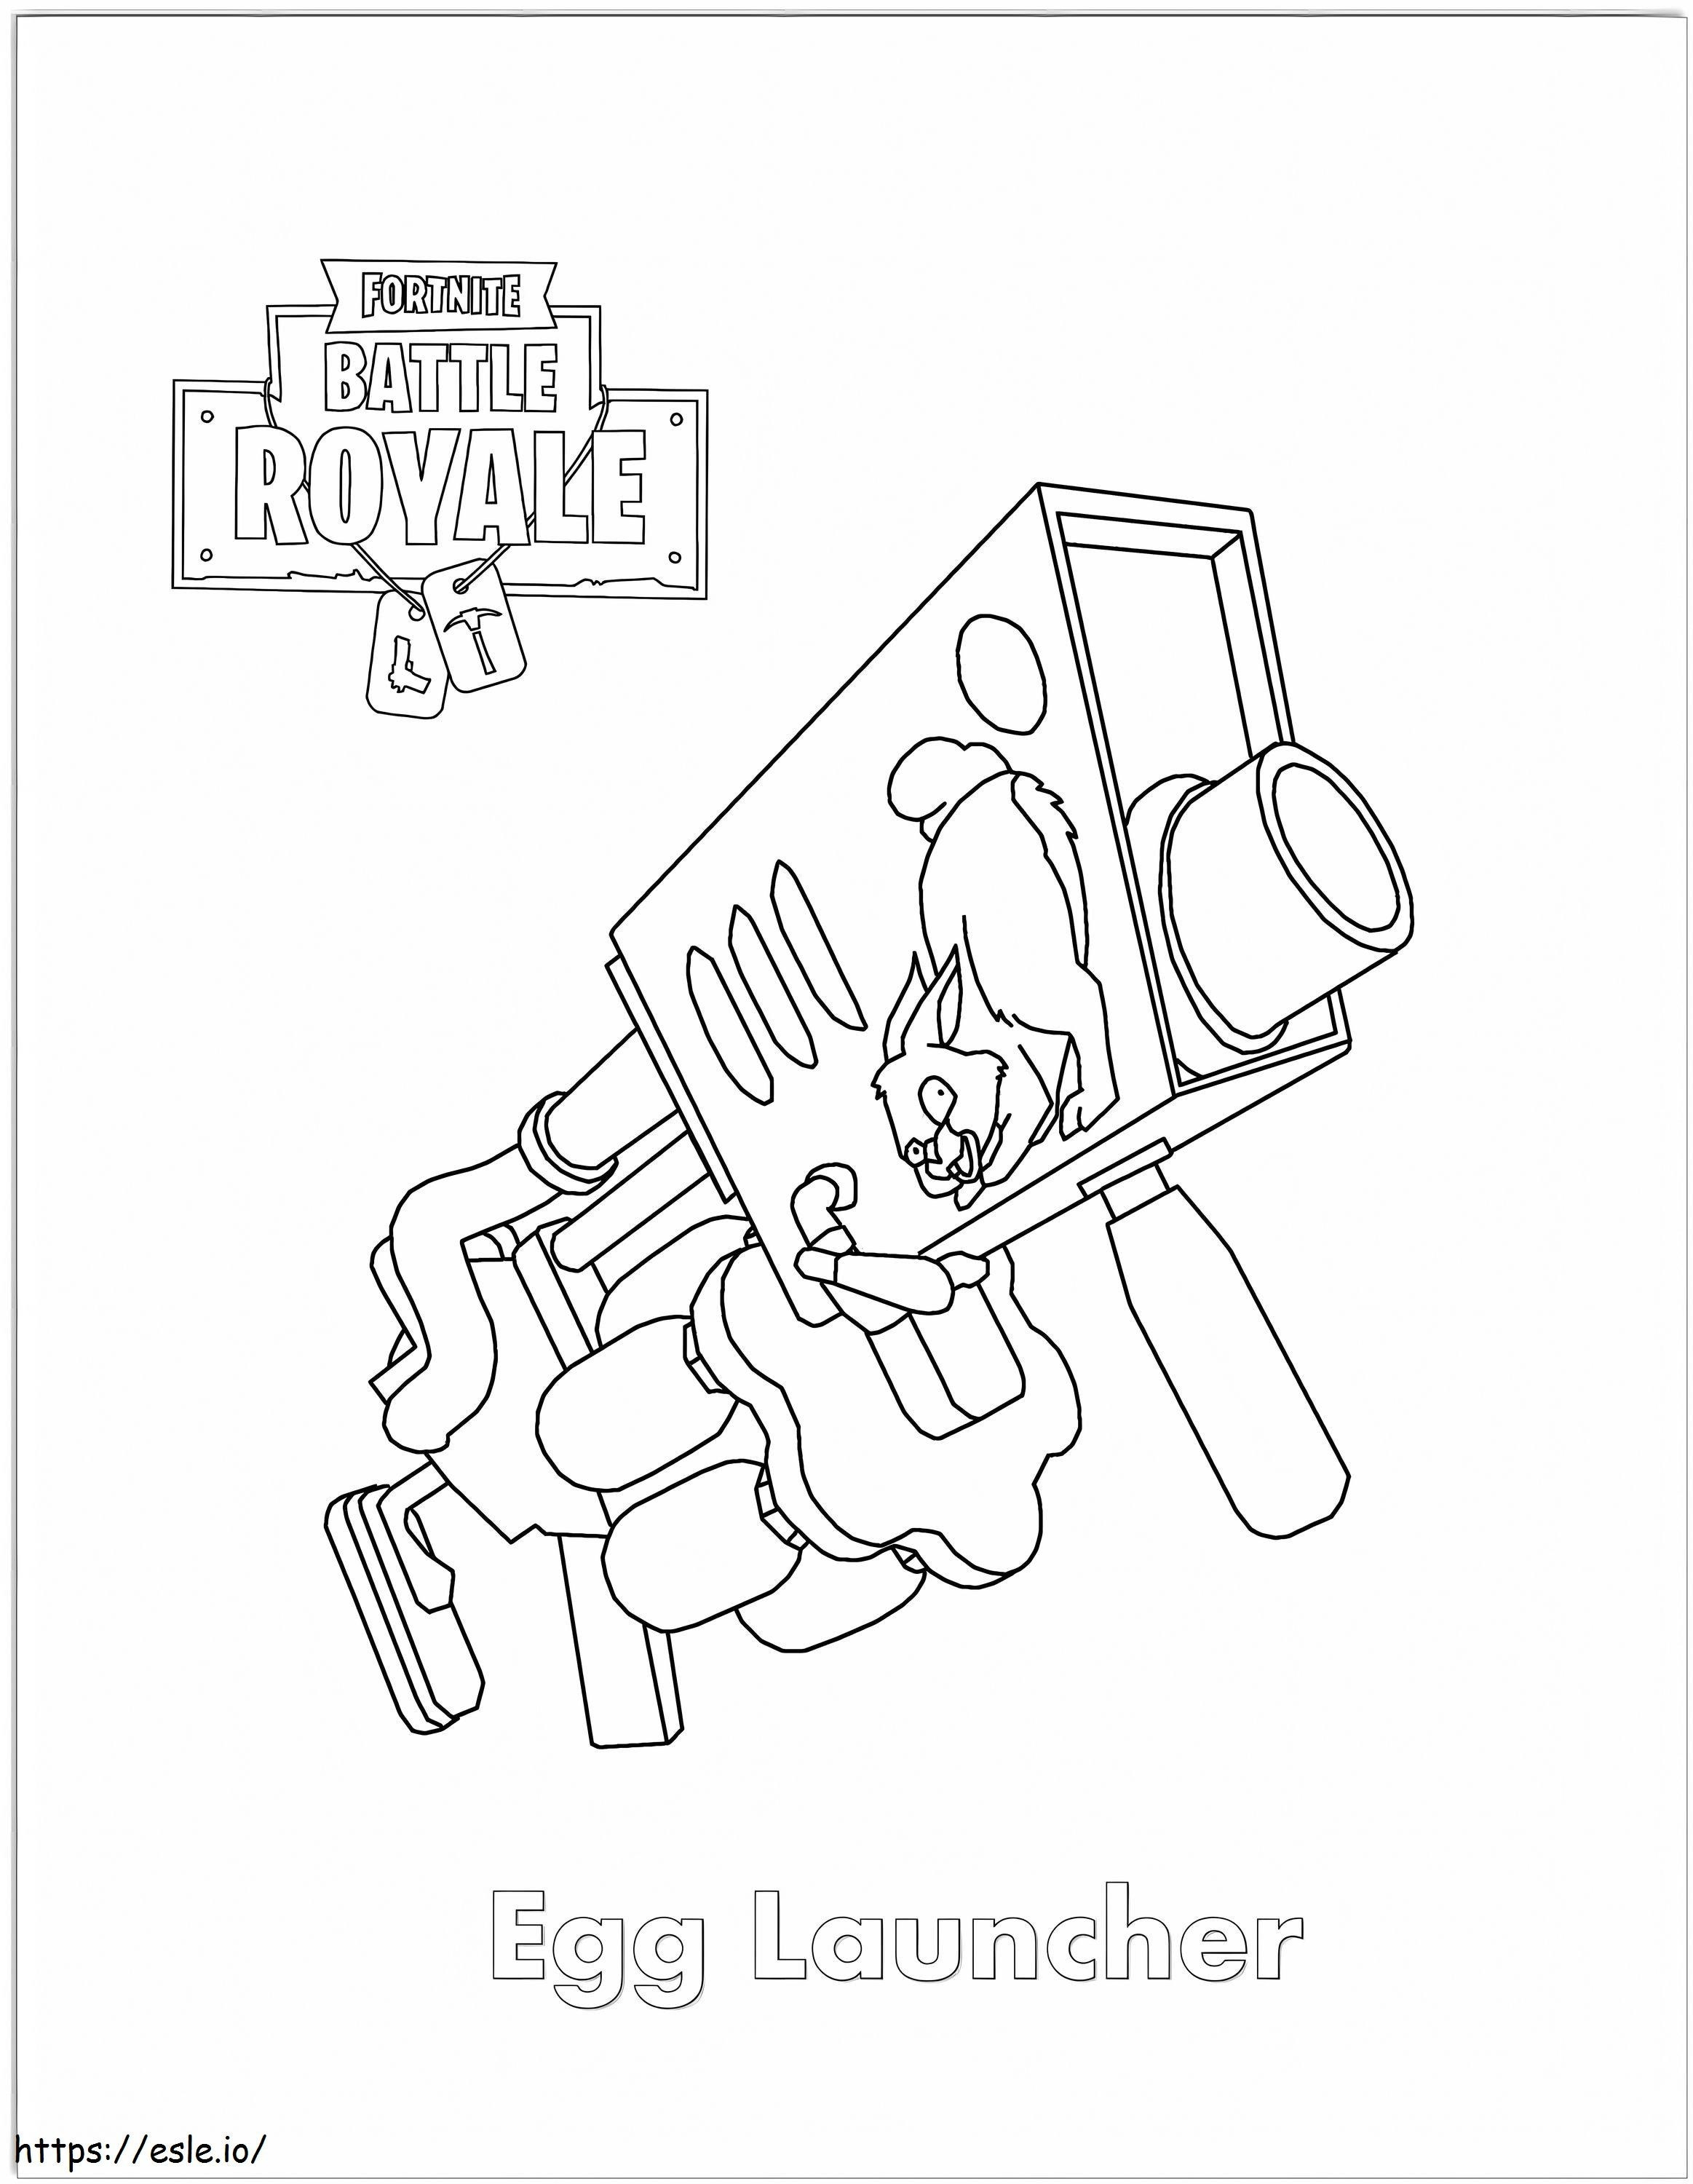 1541147973 71Xuvpf9Vjl coloring page